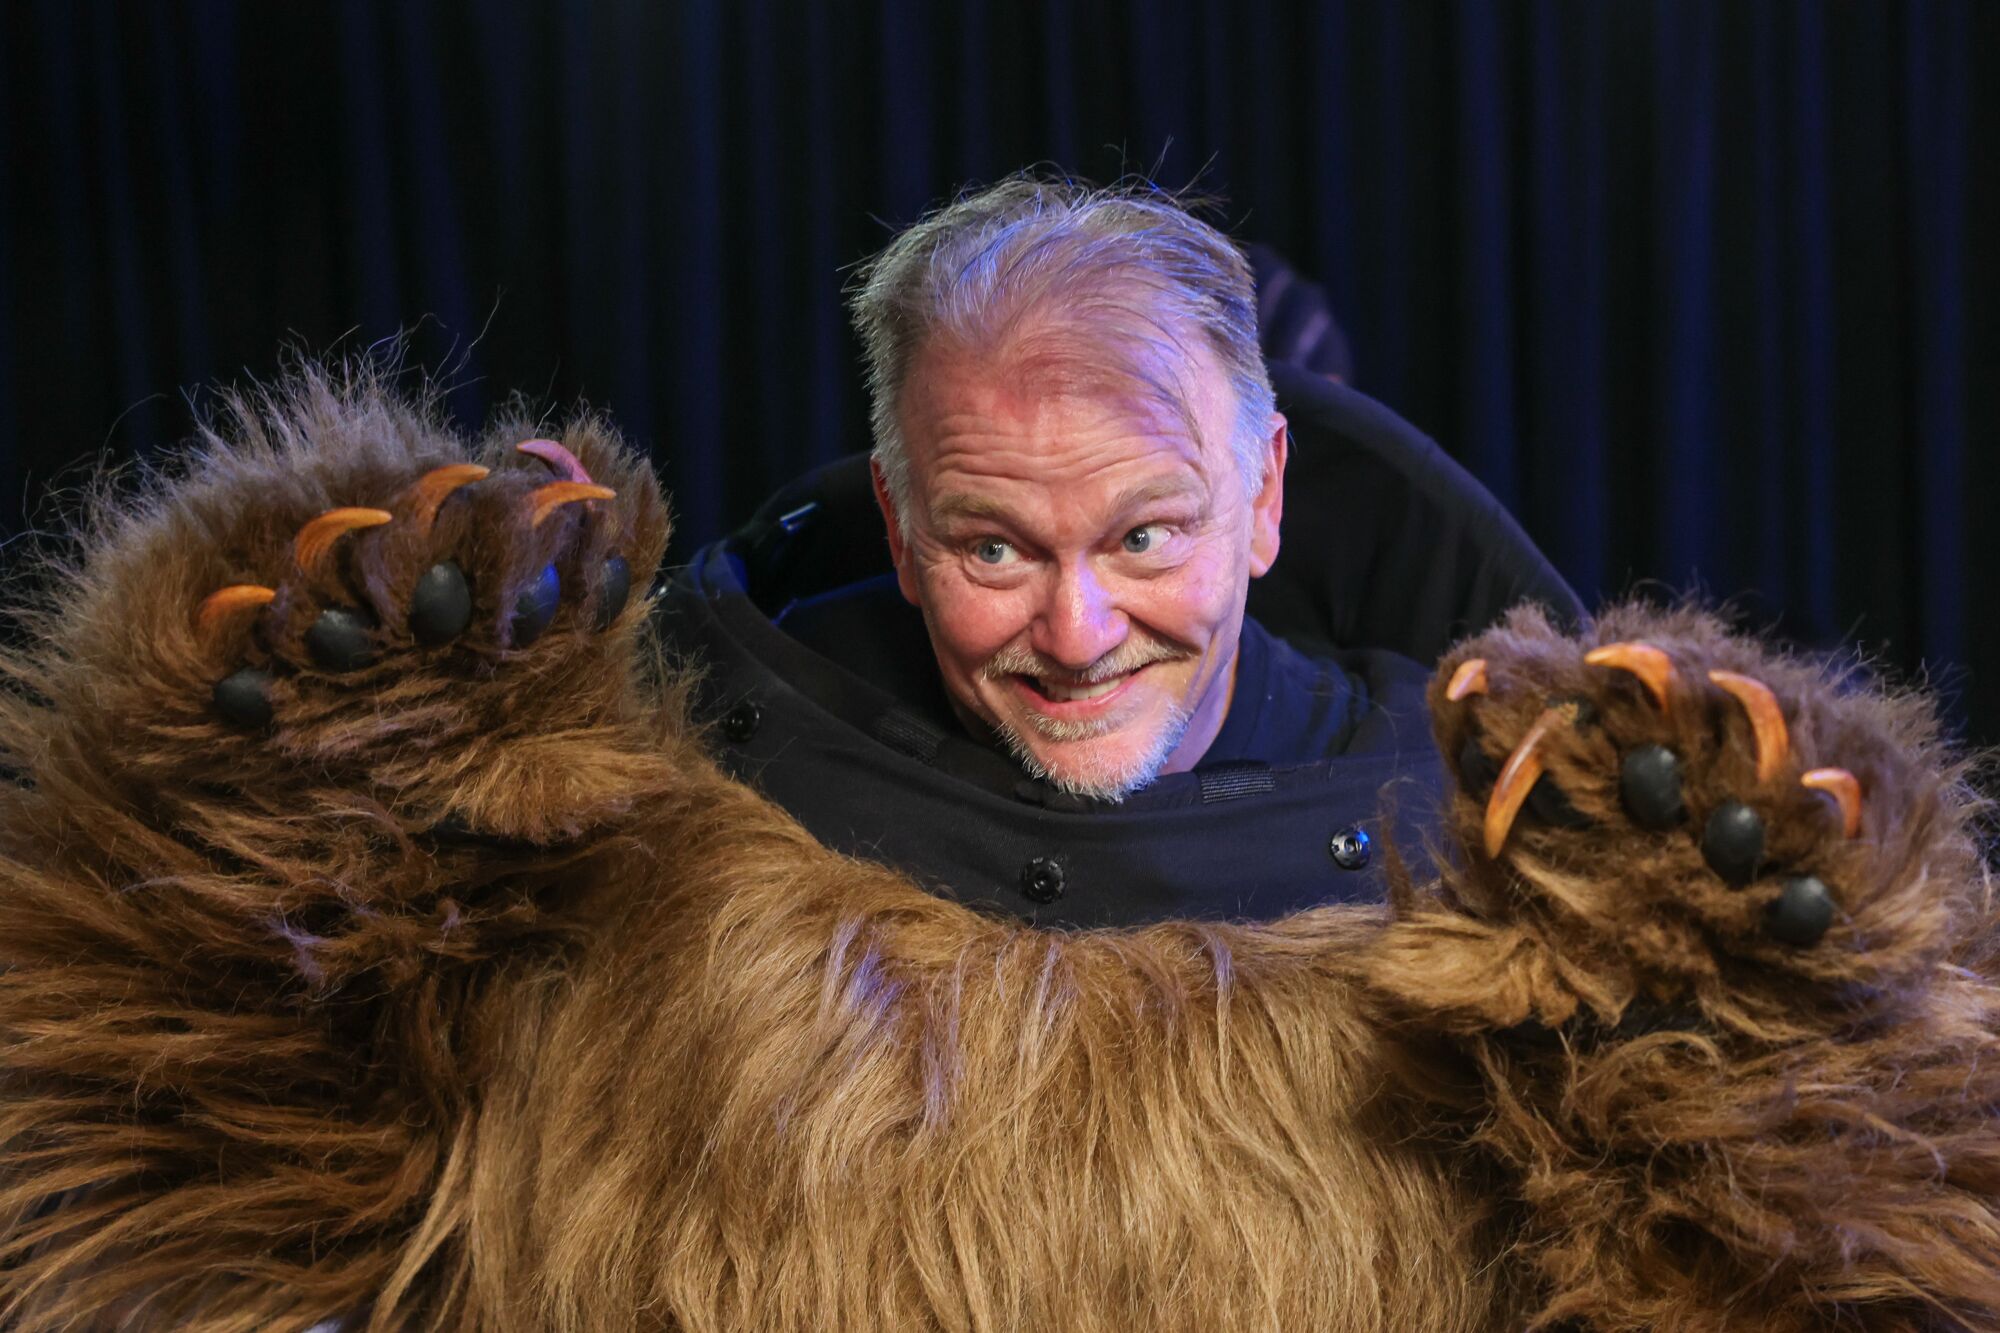 A man in a bear costume reveals his own head.